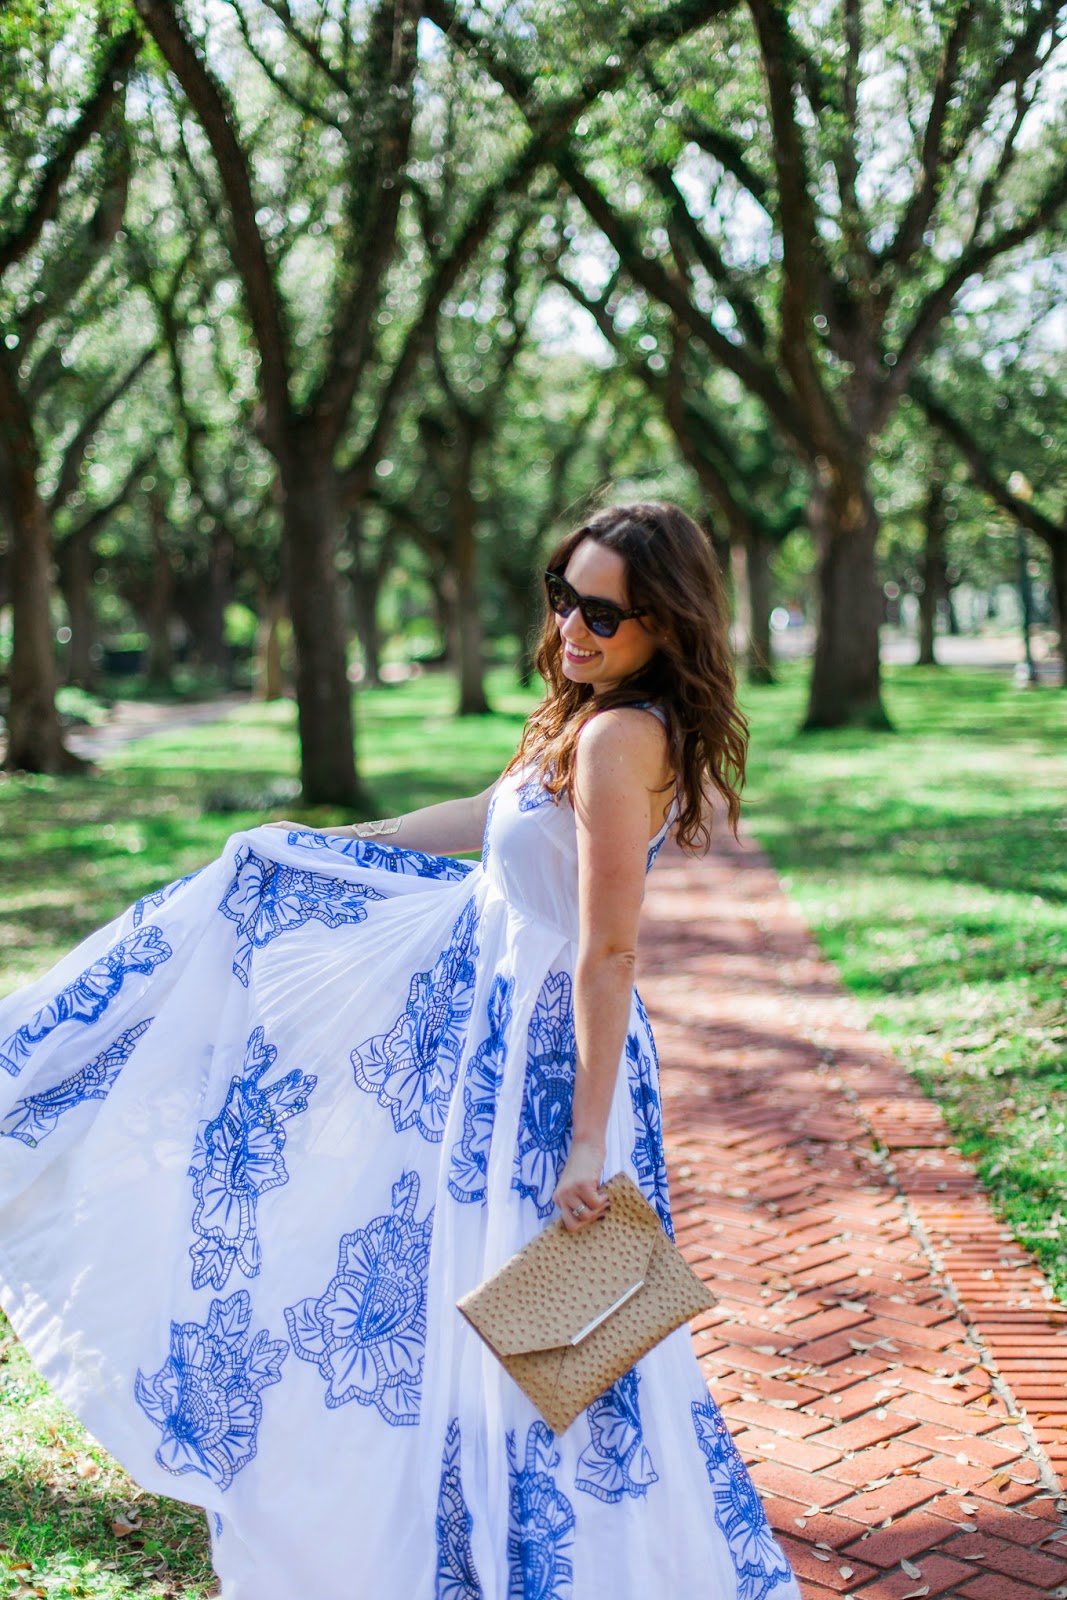 A Blue and White Dress | Lone Star Looking Glass